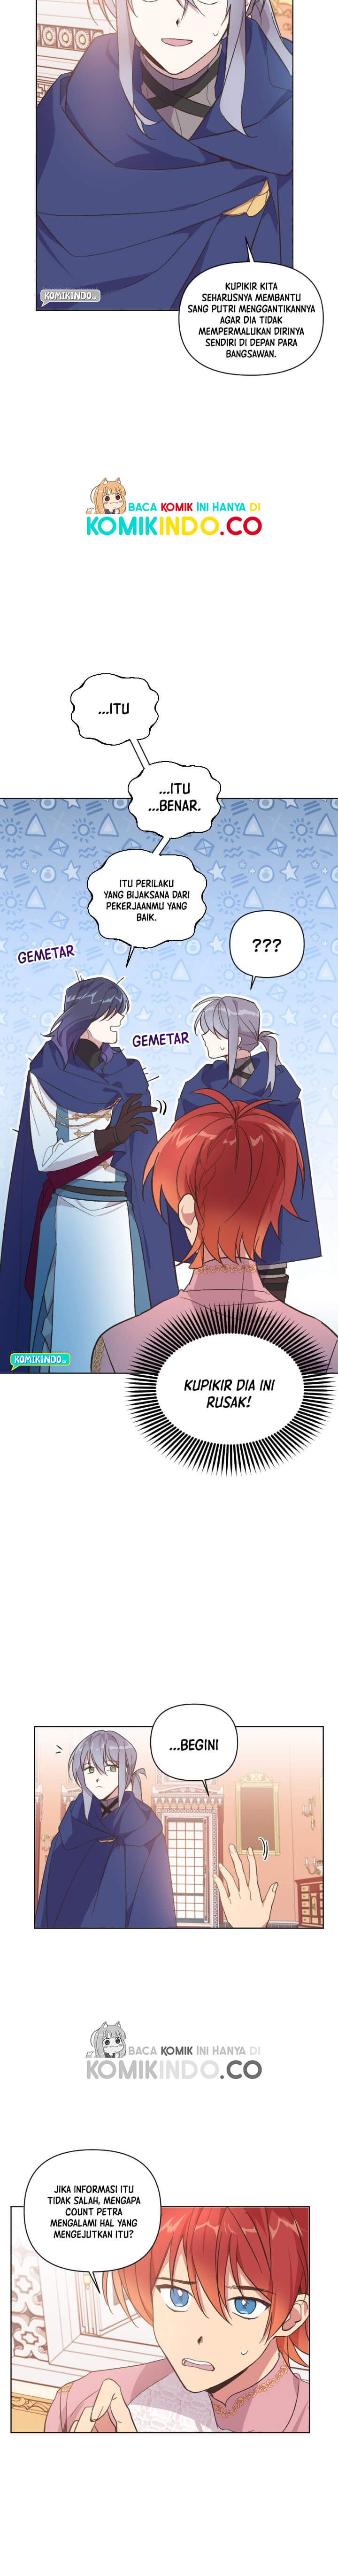 Asirhart Kingdom Aide Chapter 13